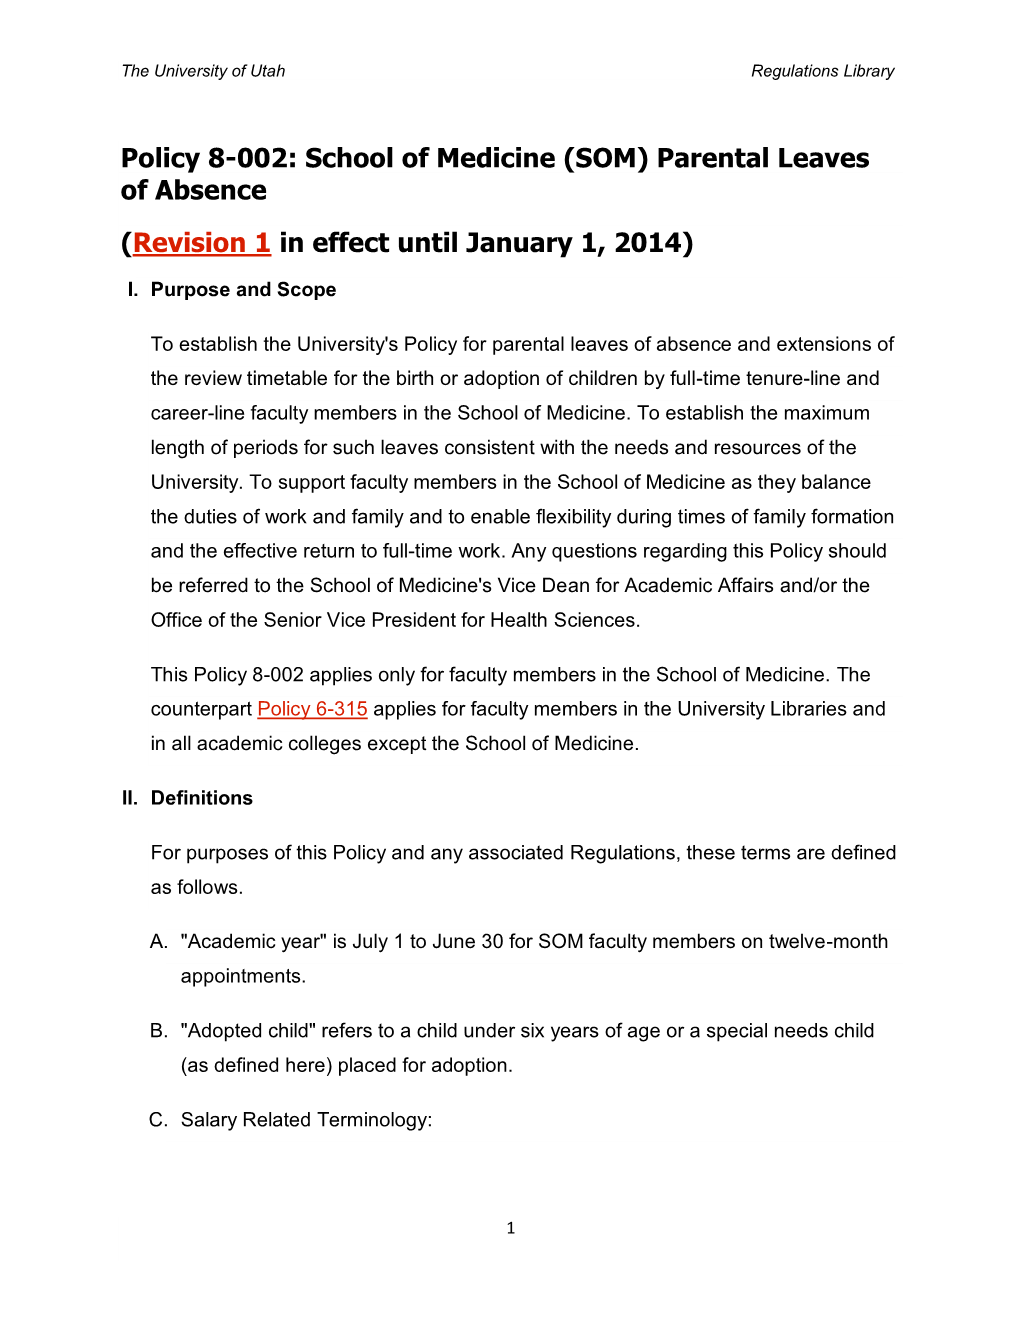 Policy 8-002: School of Medicine (SOM) Parental Leaves of Absence (Revision 1 in Effect Until January 1, 2014)